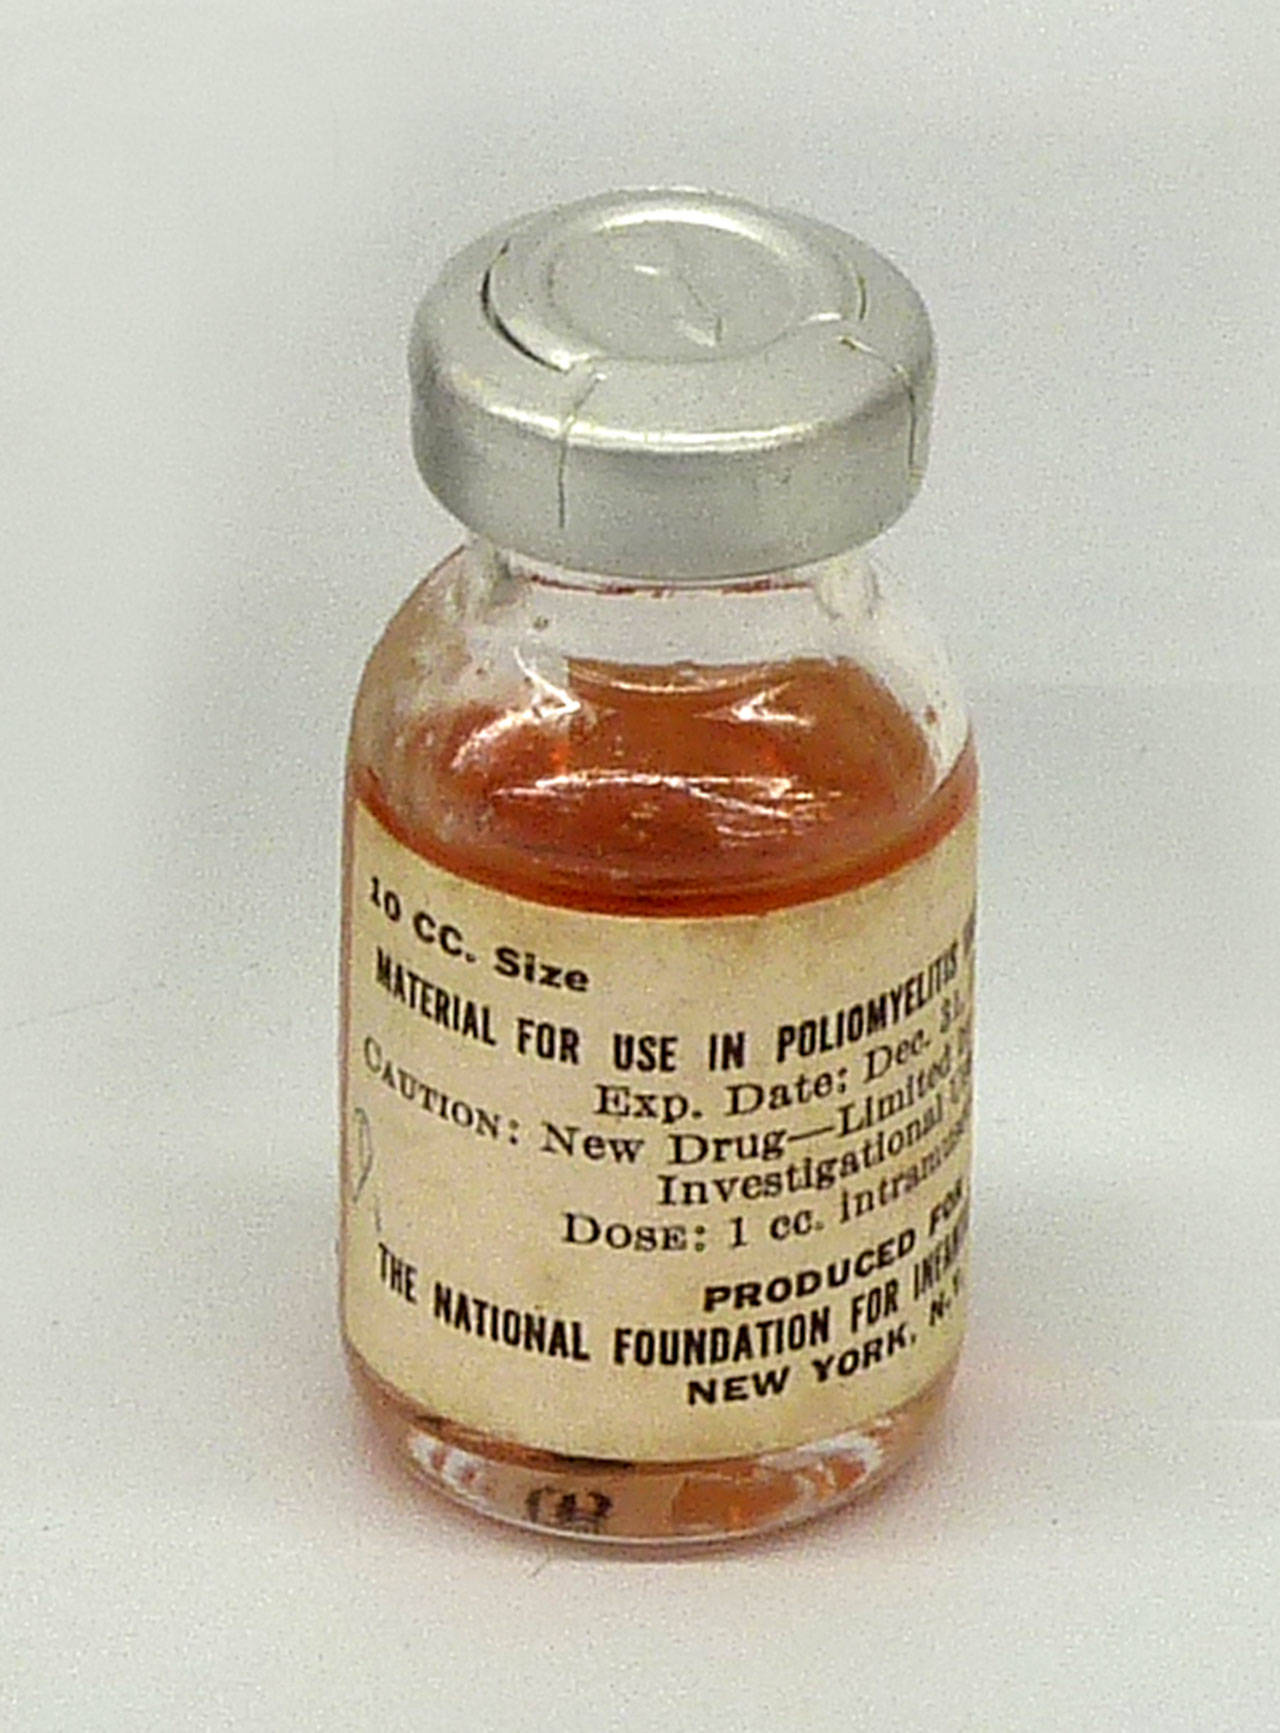 A polio vaccine vial is shown from the Jefferson County Historical Society artifact collection. (Jefferson County Historical Society)